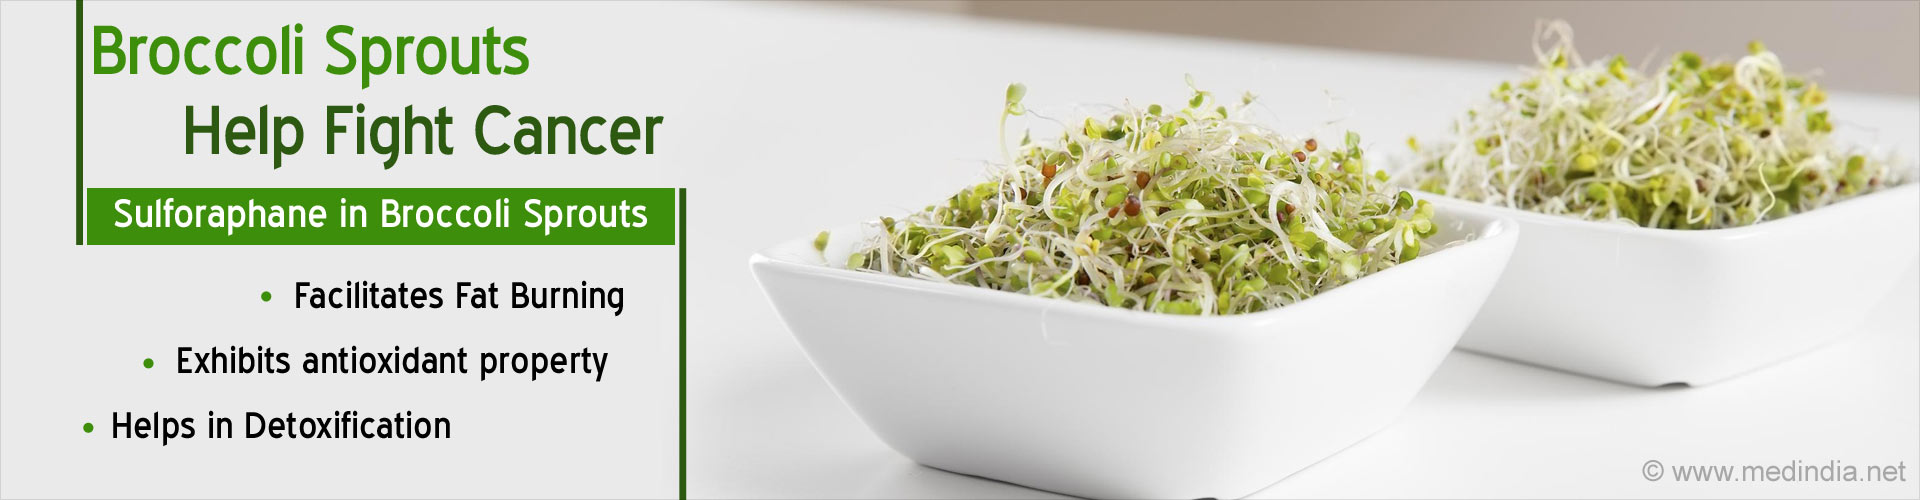 Broccoli Sprouts Help Fight Cancer
Sulforaphane in Broccoli Sprouts
- Facilitates Fat Burning
- Exhibits antioxidant property
- Helps in detoxification